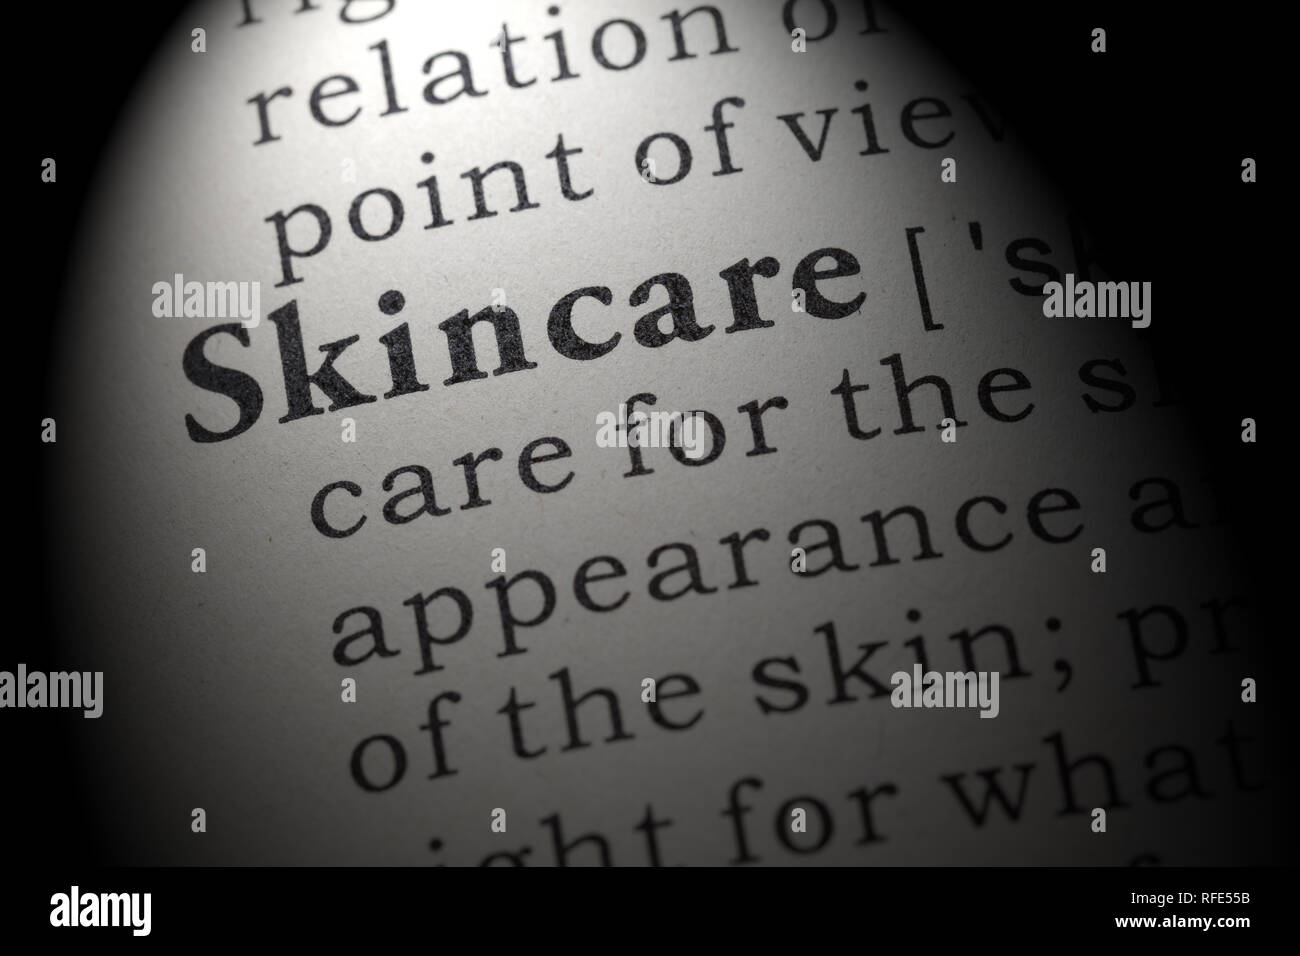 Fake Dictionary, Dictionary definition of the word skincare. including key descriptive words. Stock Photo